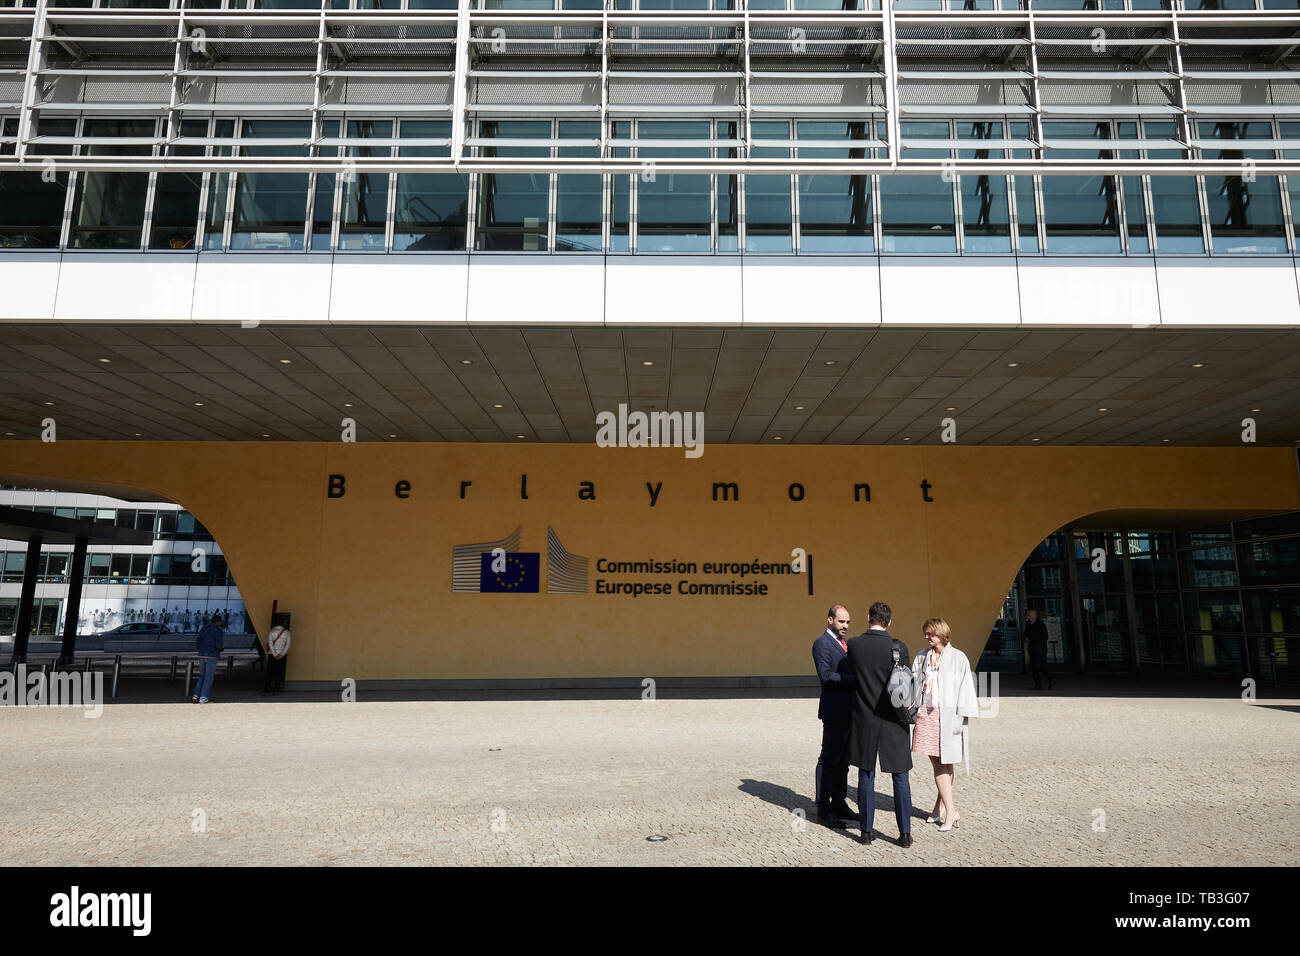 01.04.2019, Brussels, Brussels, Belgium - Group of people in front of the entrance area of the Berlaymont building in the Europaviertel. 00R190401D102 Stock Photo